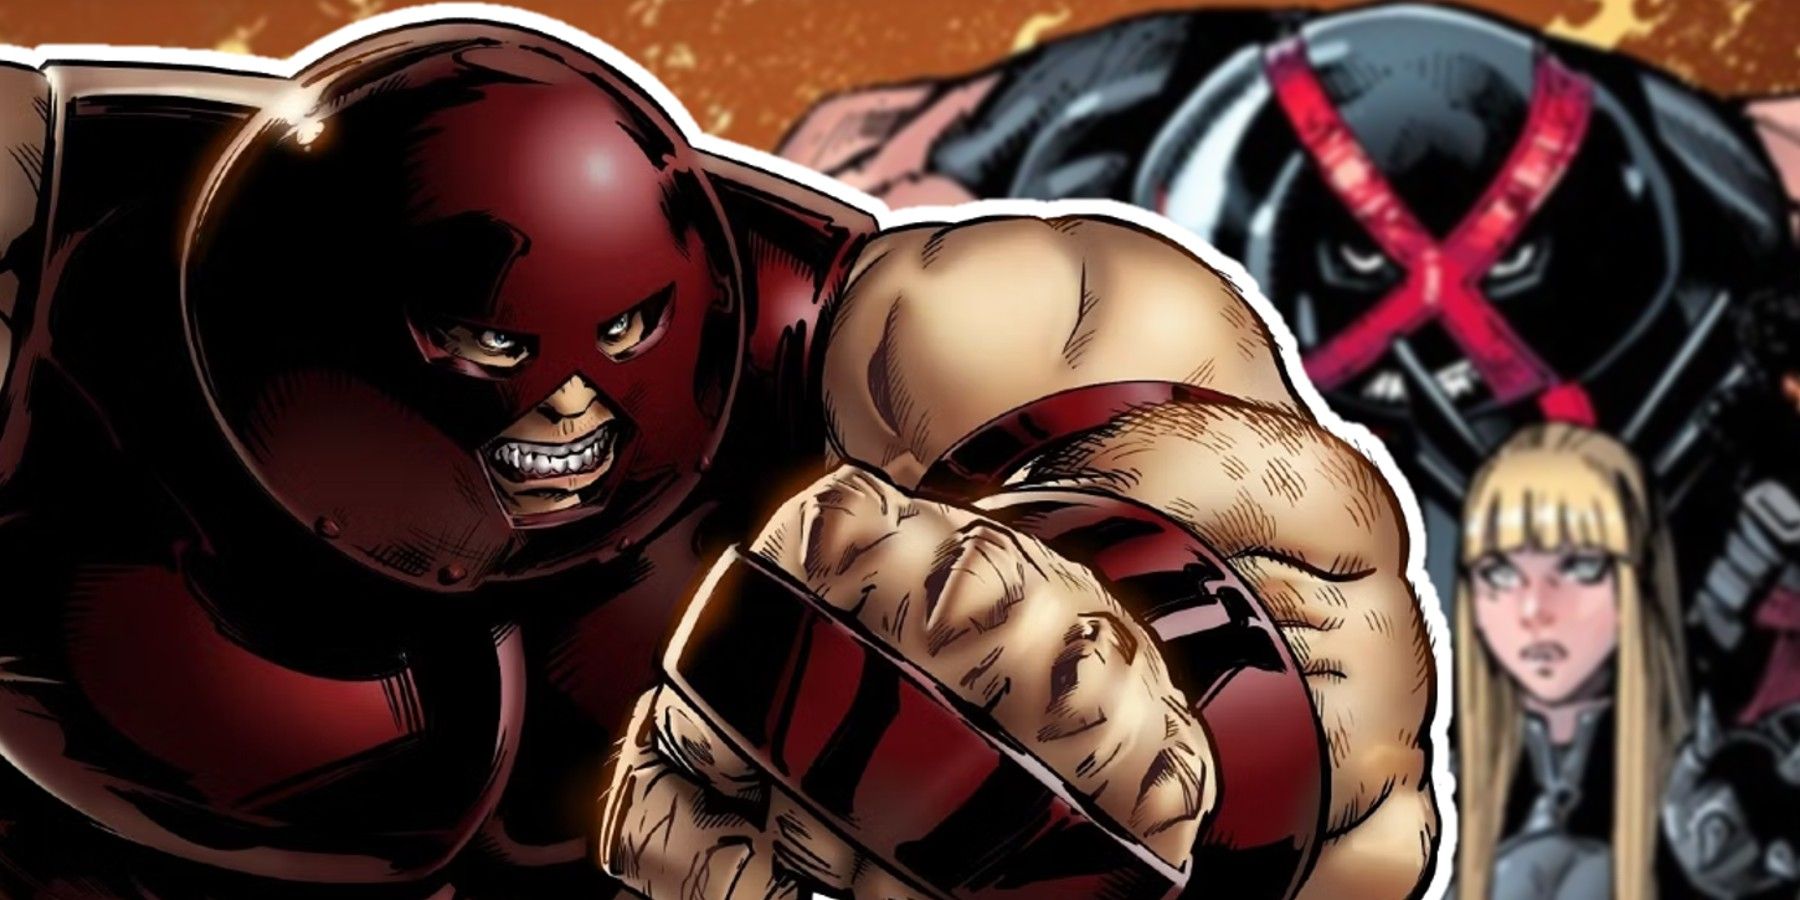 Juggernaut with New X-Men Design From The Ashes